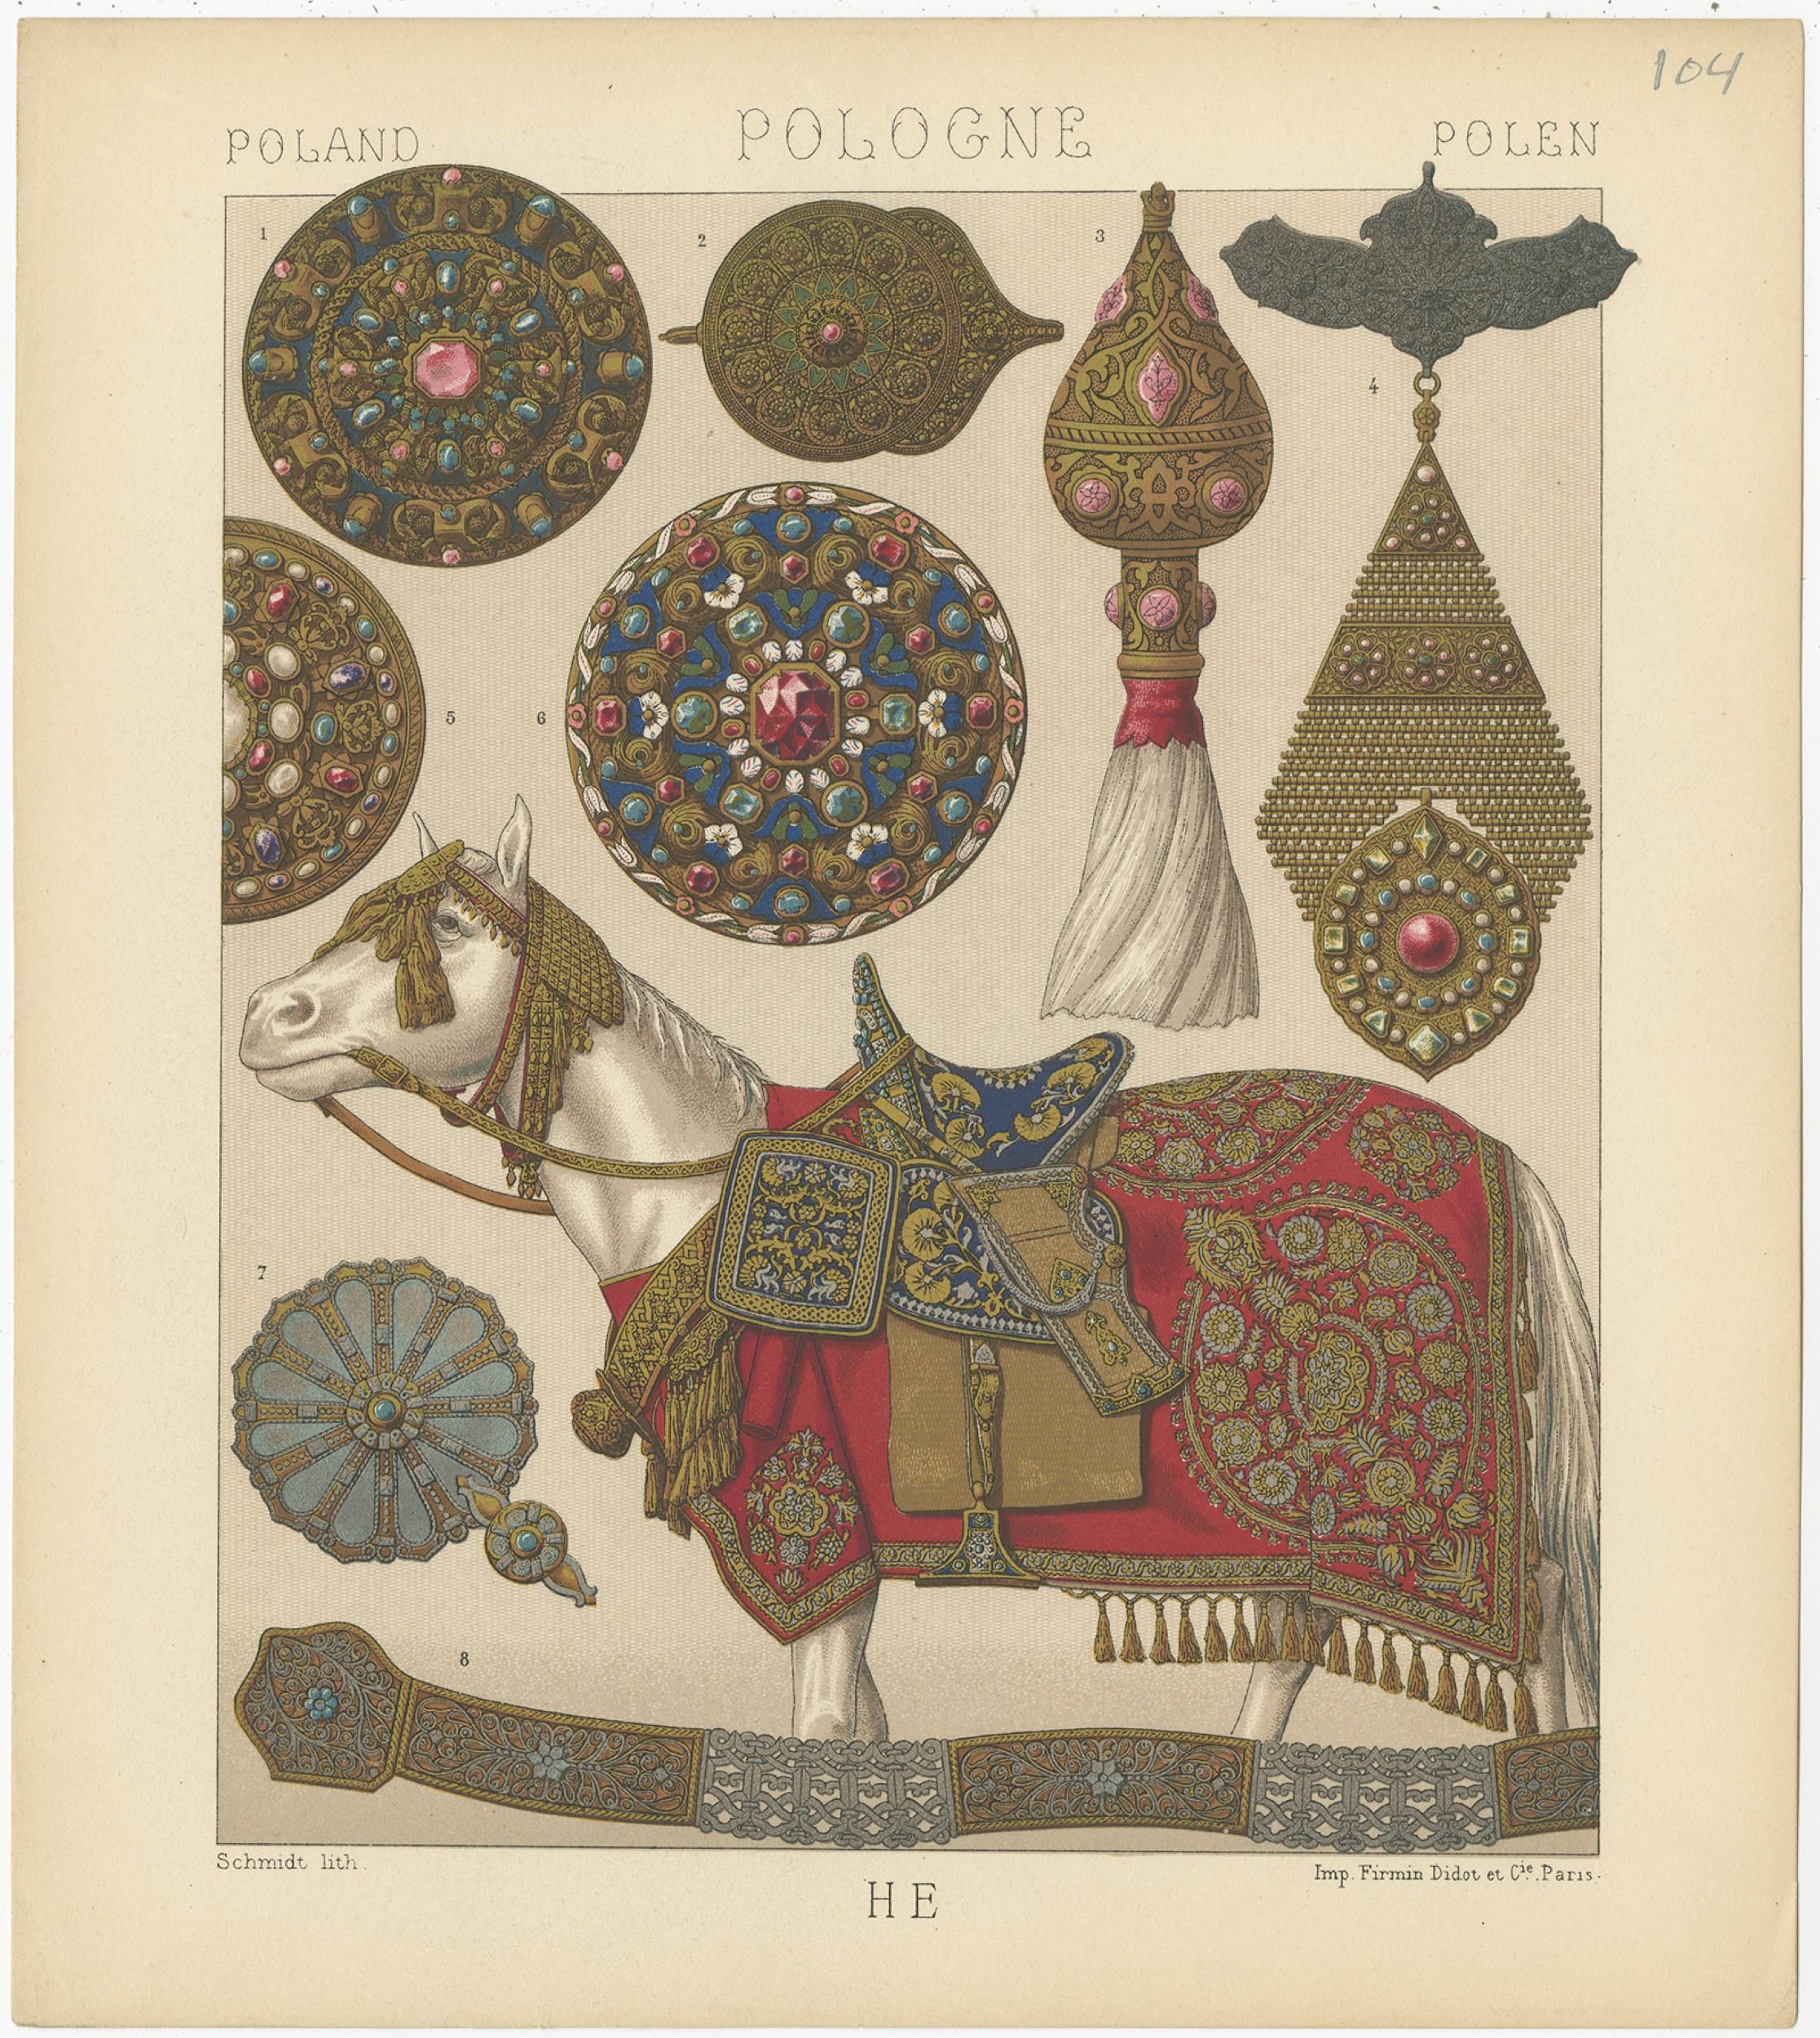 Antique print titled 'Poland - Pologne - Polen'. Chromolithograph of Polish Decorative Objects. This print originates from 'Le Costume Historique' by M.A. Racinet. Published, circa 1880.